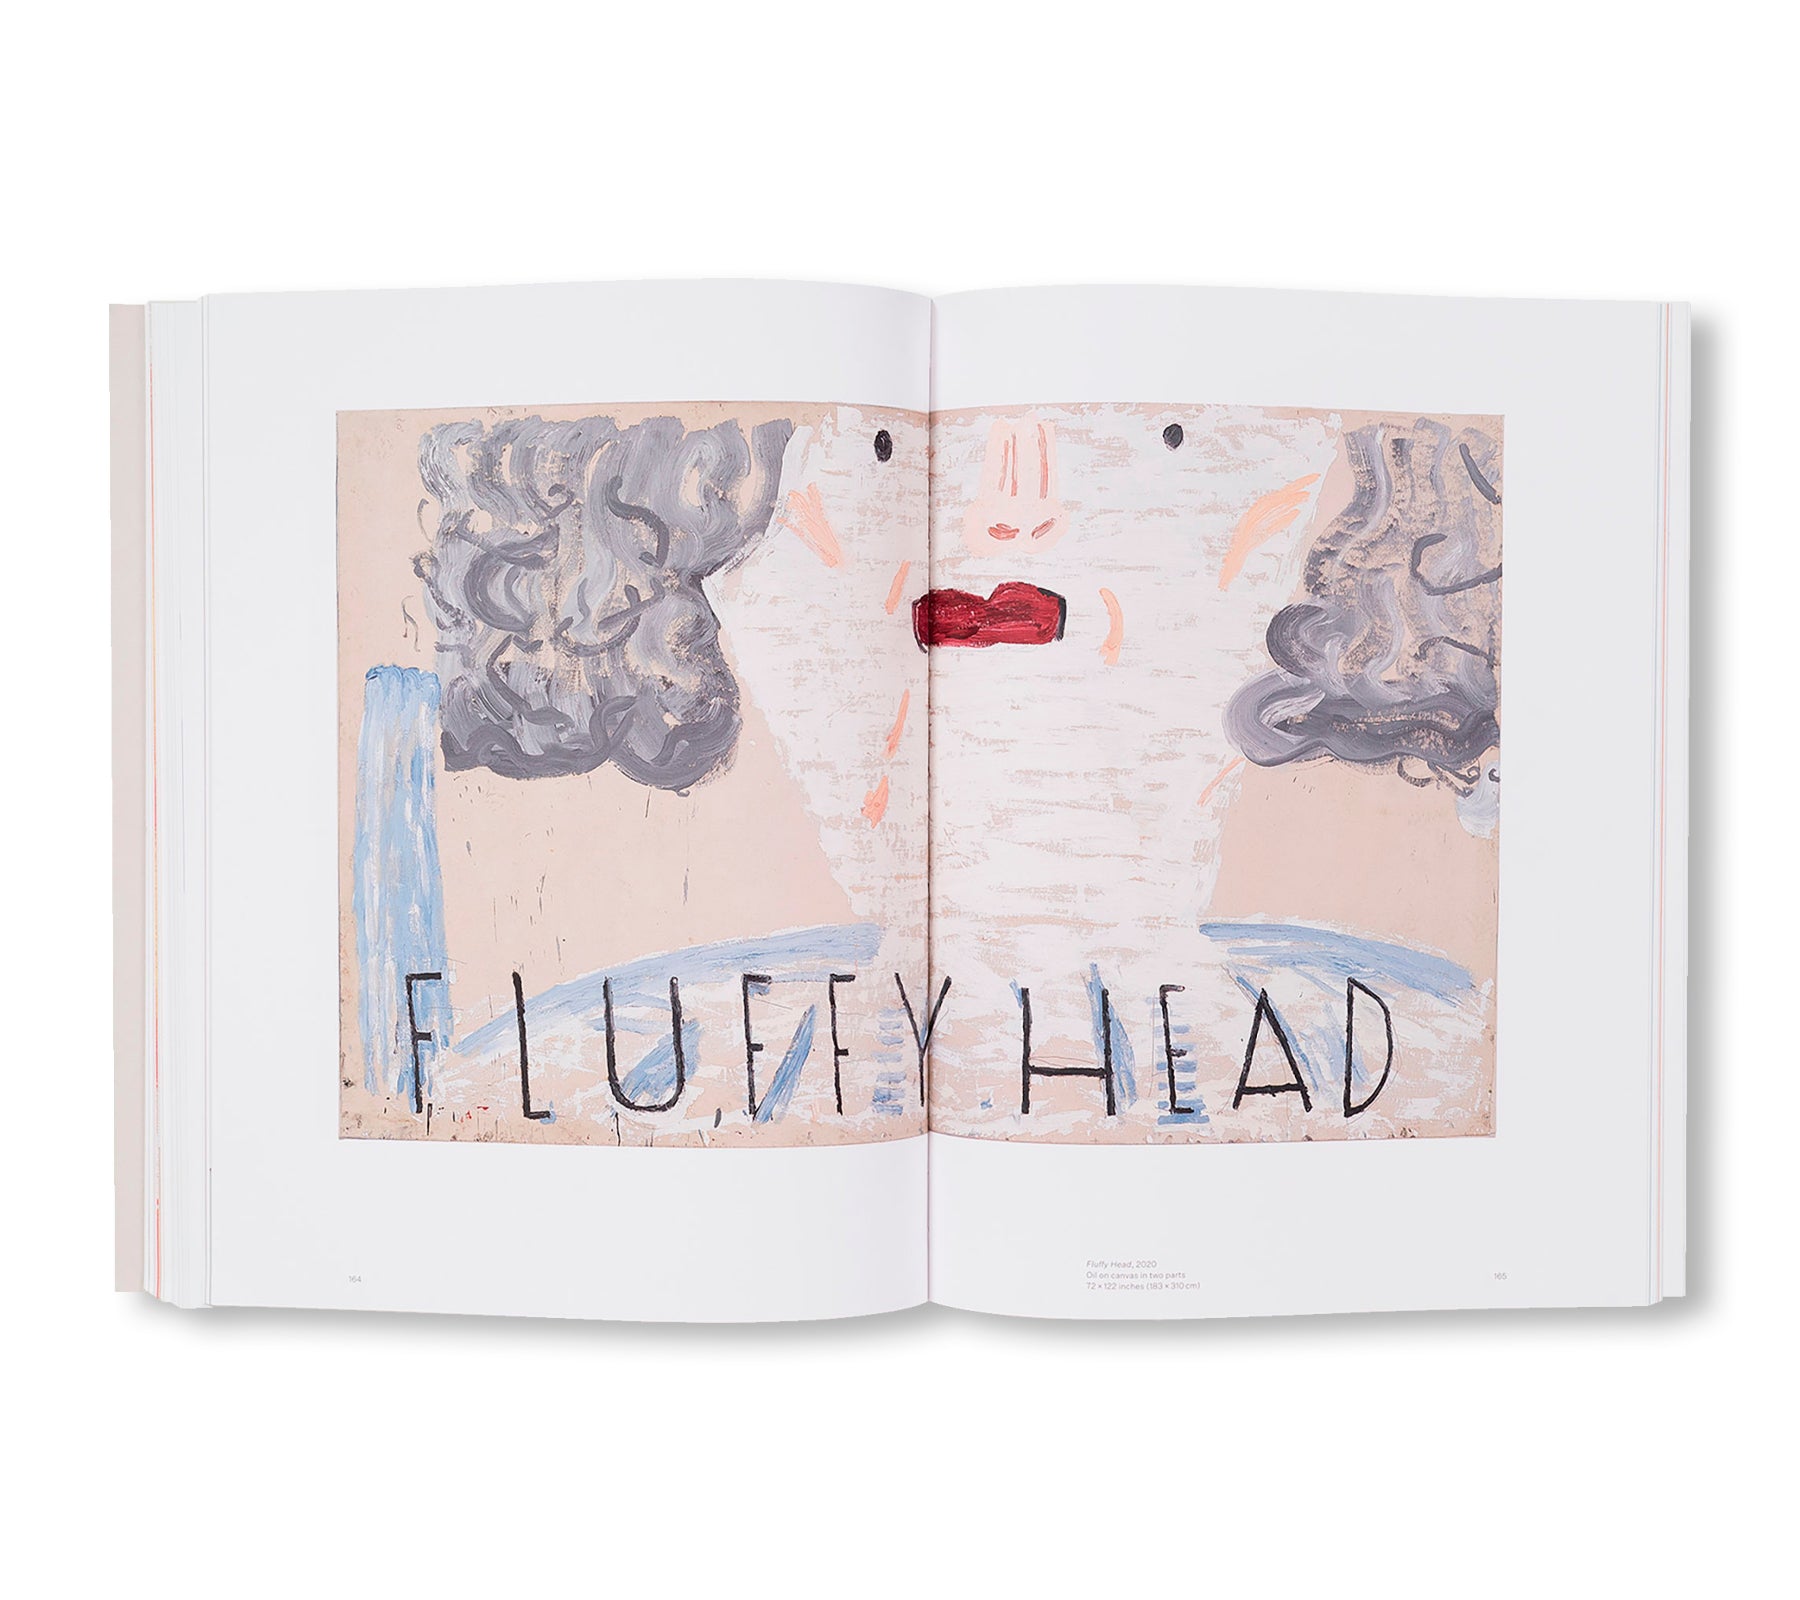 WHICH ONE by Rose Wylie